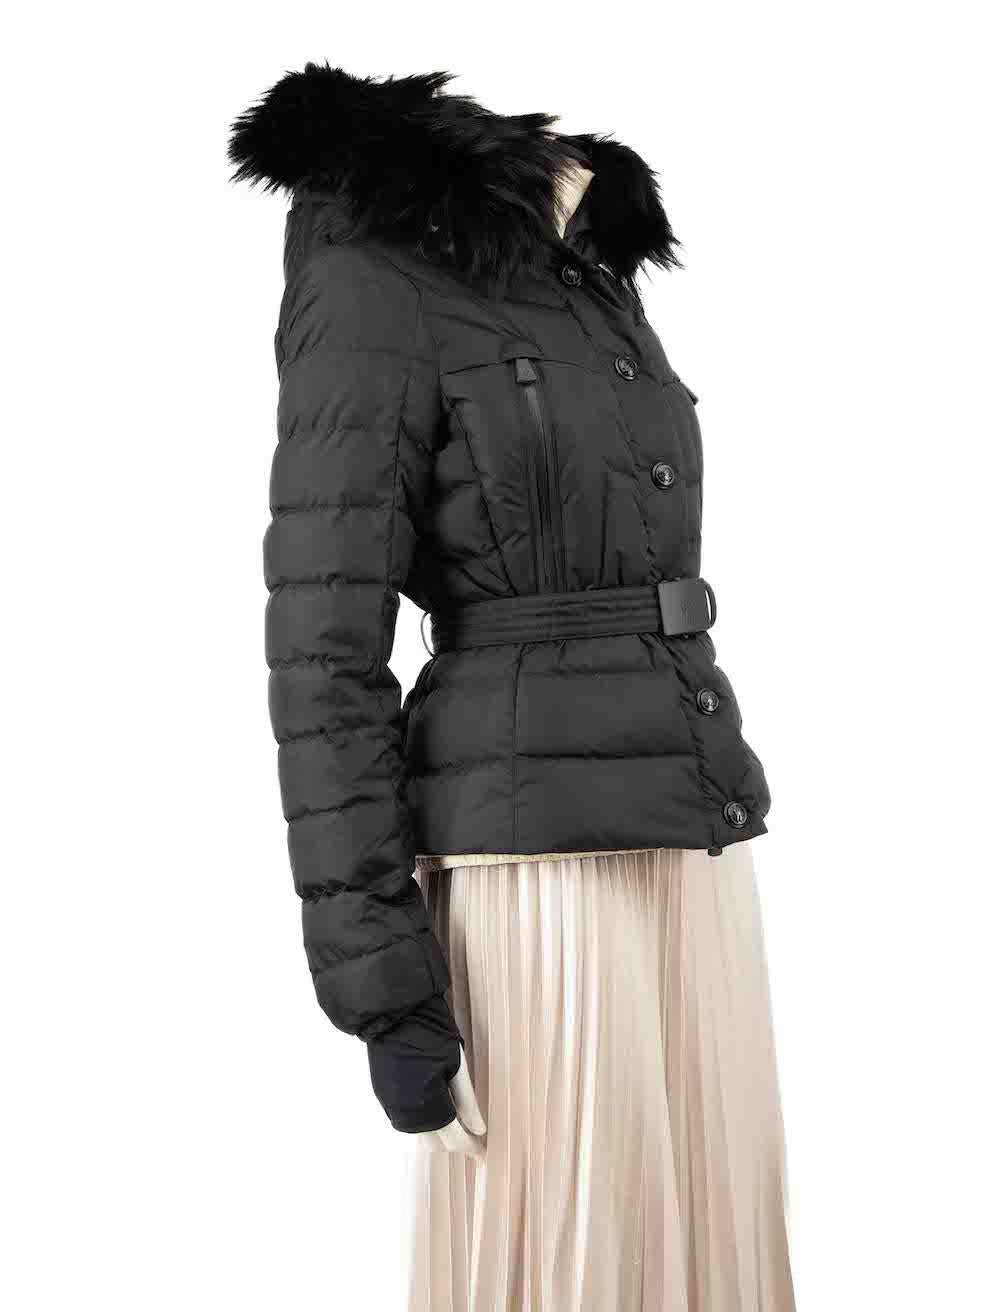 CONDITION is Very good. Minimal wear to coat is evident. Minimal wear to right side (as worn) front, with a small pluck to the weave on this used Moncler Grenoble designer resale item.
 
 
 
 Details
 
 
 Model: Beverley
 
 Black
 
 Synthetic
 
